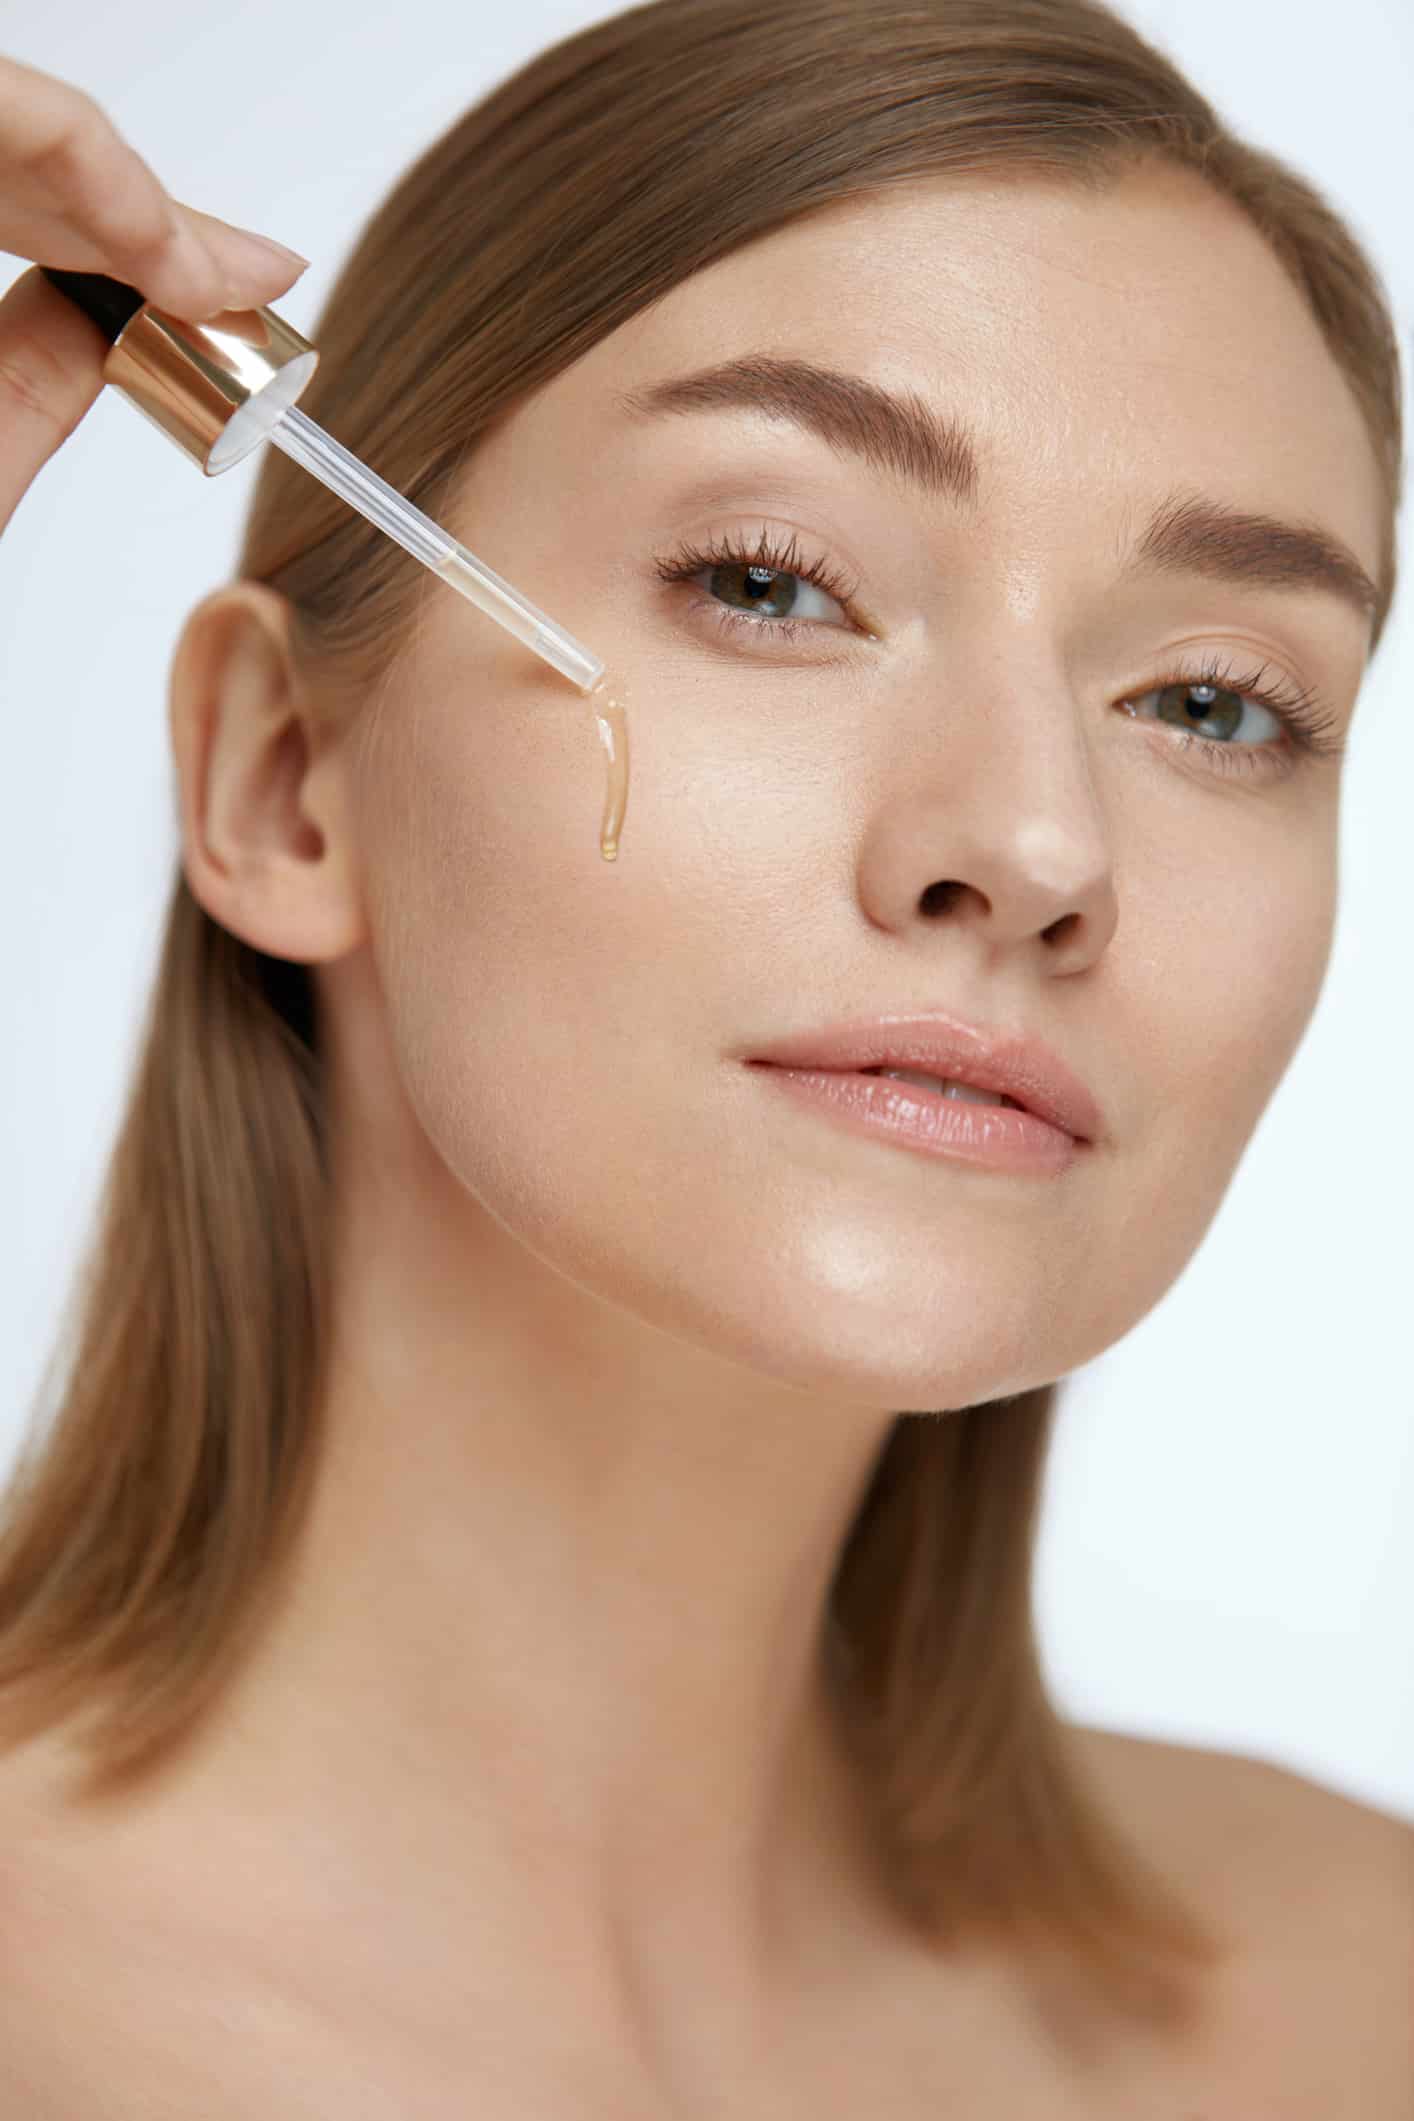 Skin care. Woman applying serum or facial oil on beauty face closeup. Girl model applying essence on white background